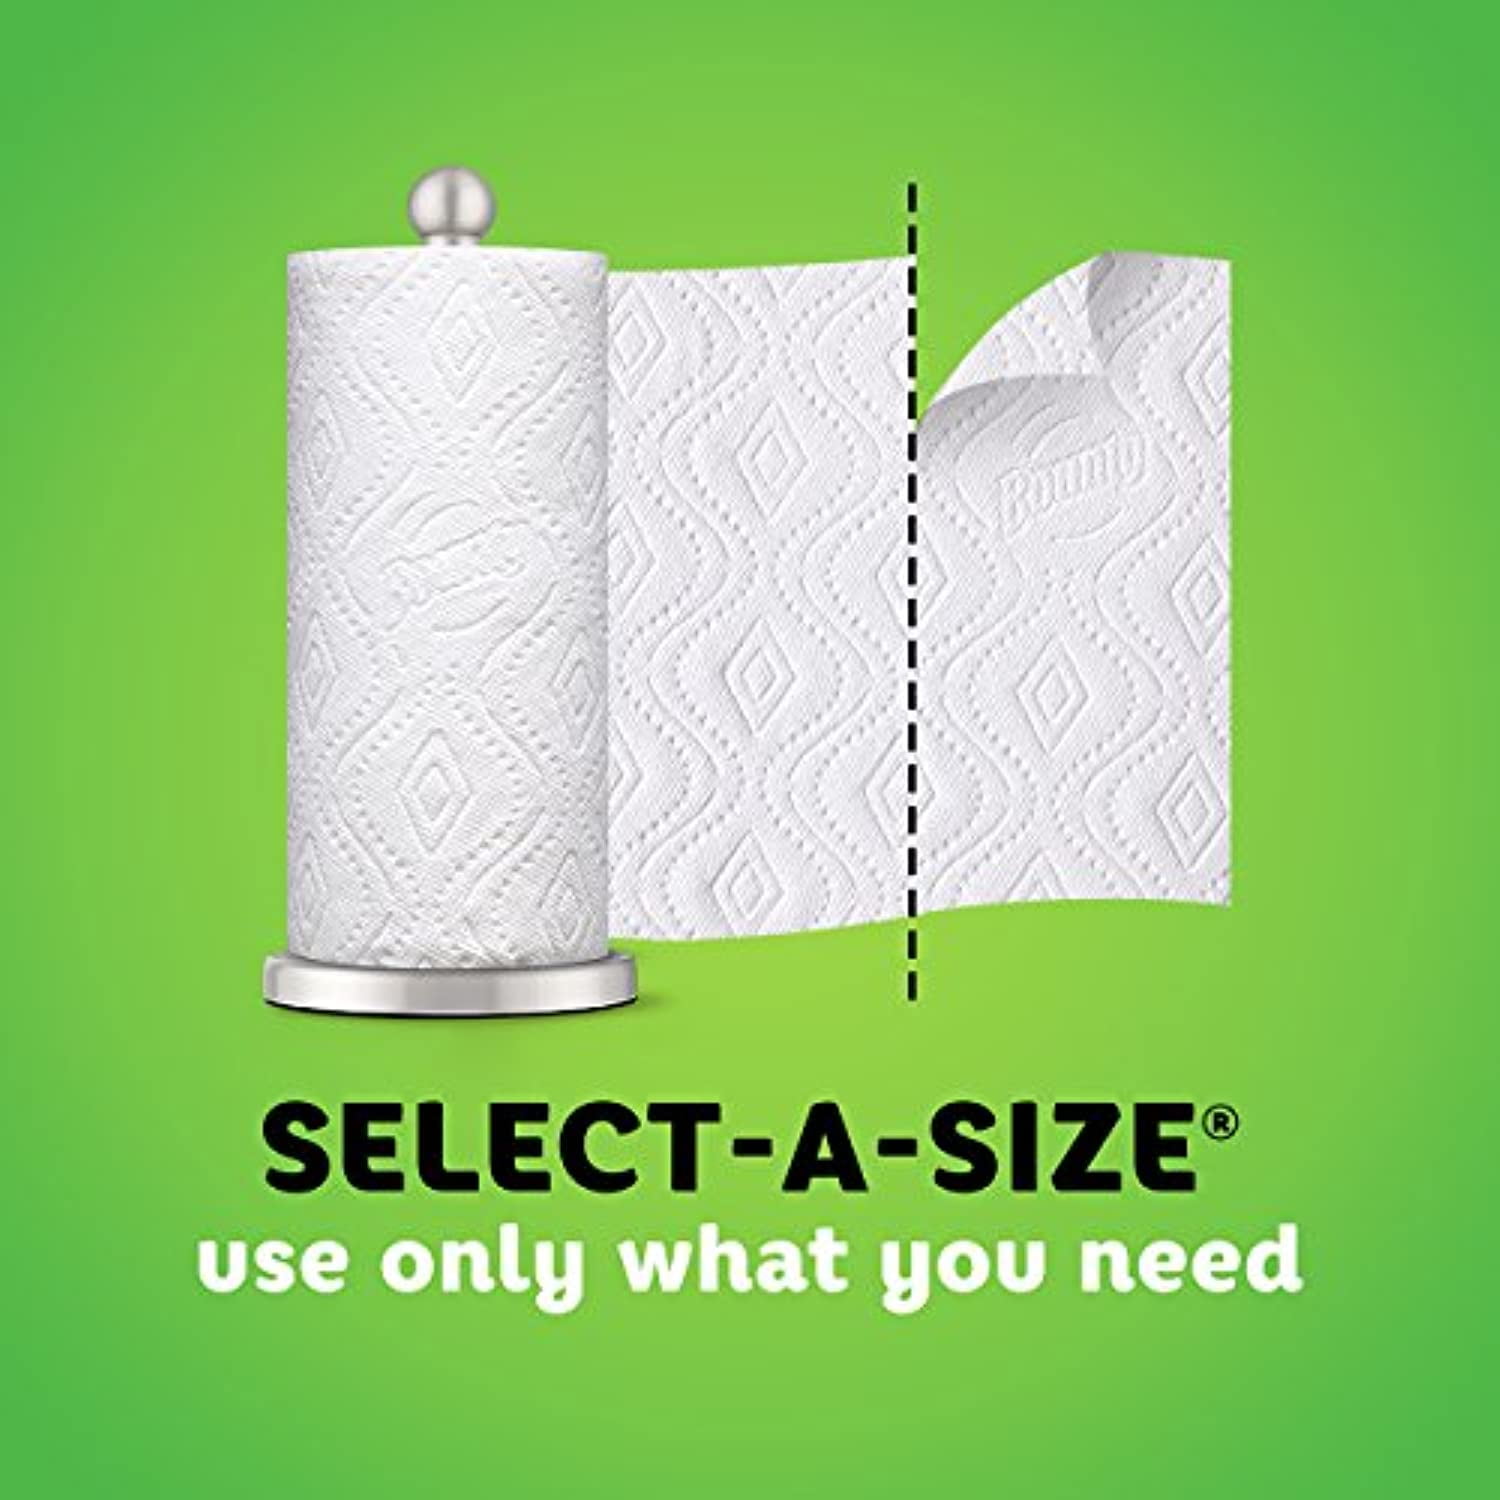 Bounty Select-A-Size Paper Towels, White, 8 Double Plus Rolls = 20 Regular Rolls (Packaging May Vary) - 1